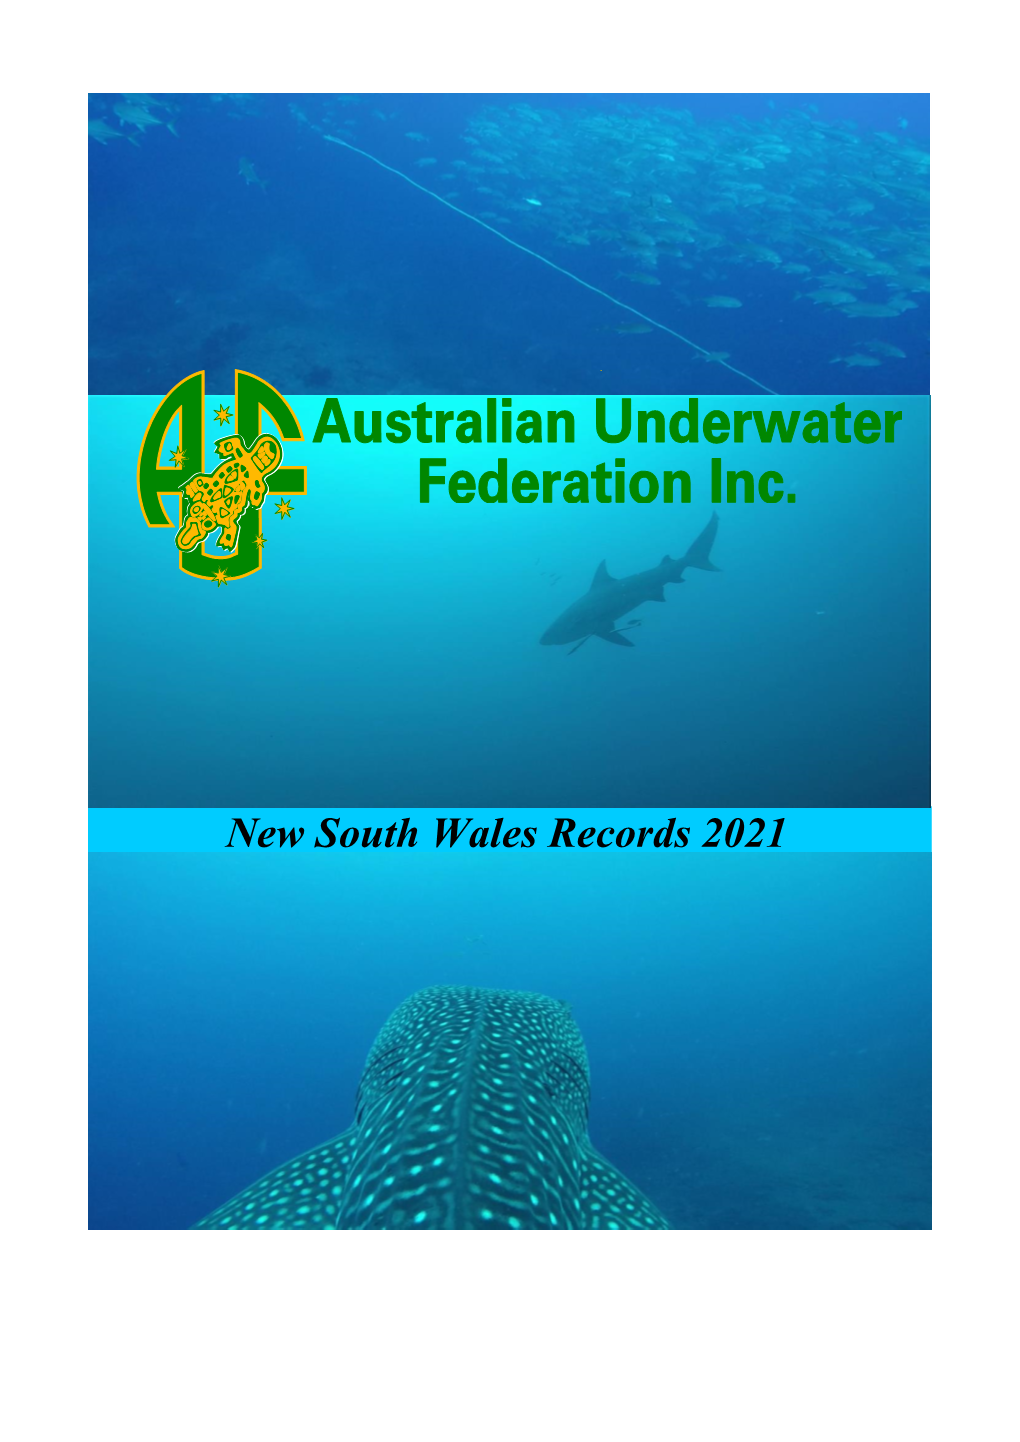 New South Wales Records 2021 NSW State Spearfishing Records Flinders Reef S.E.Queensland